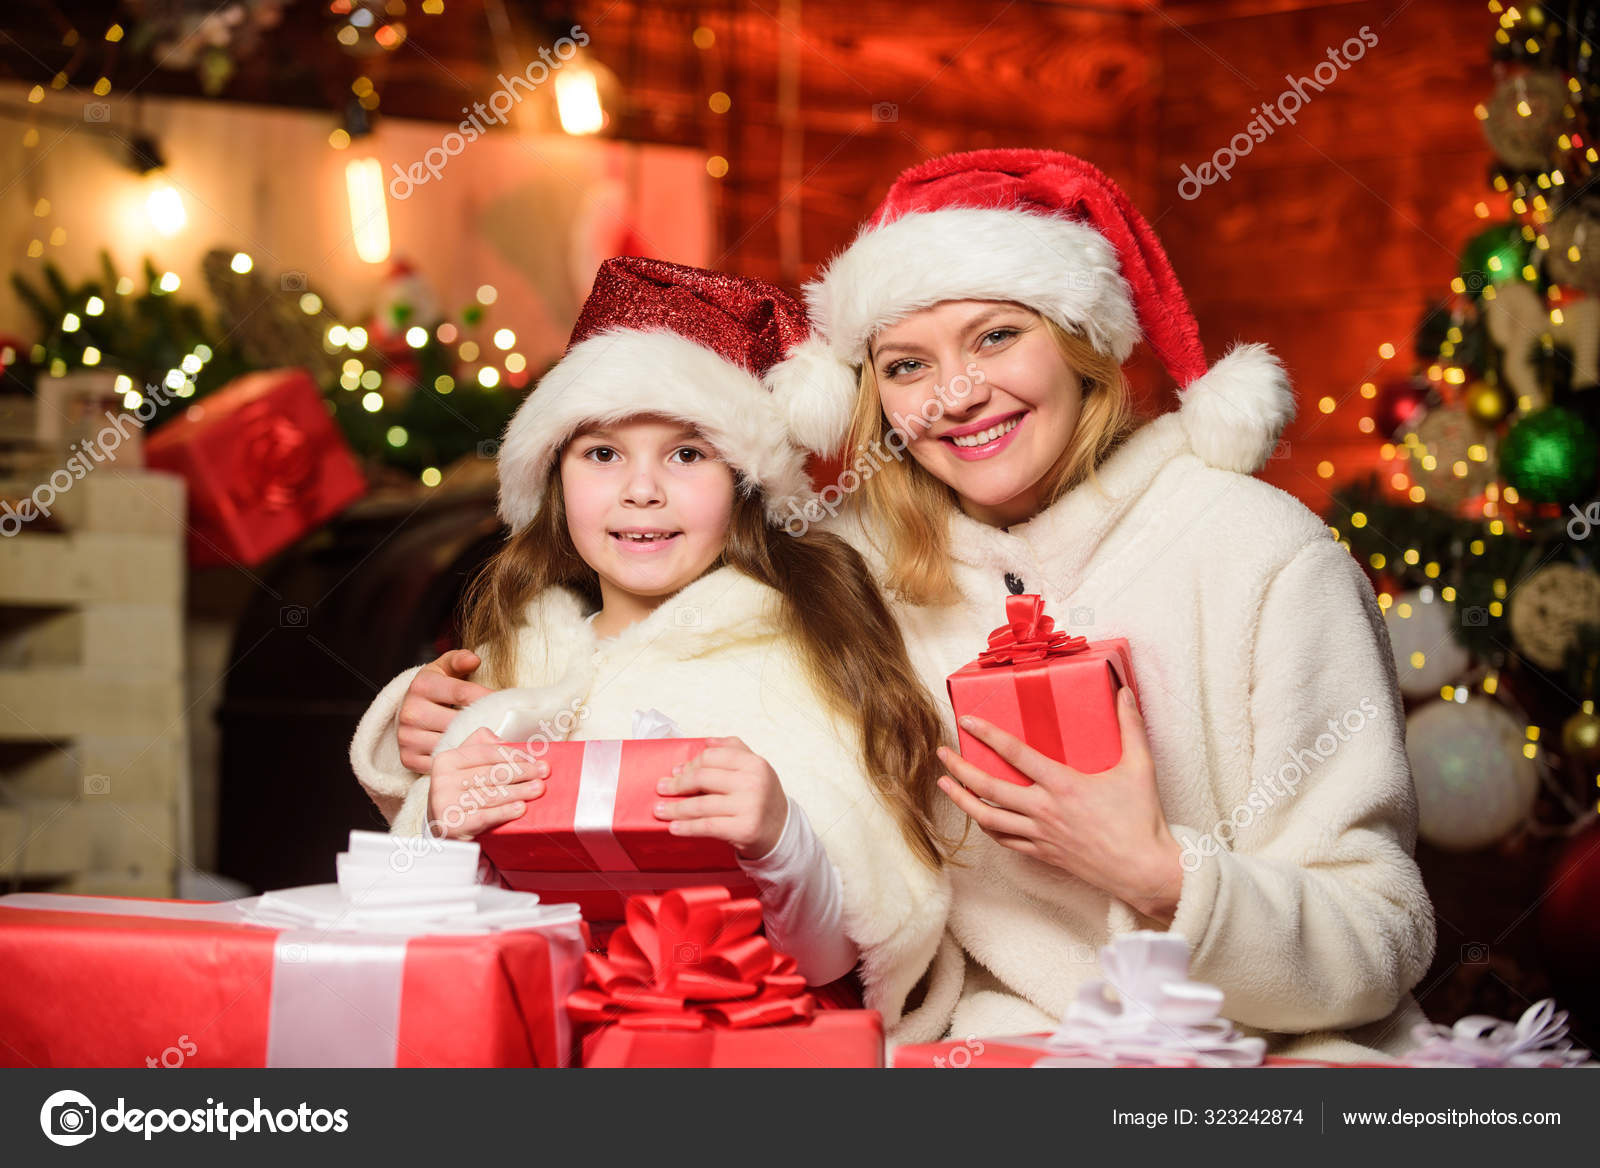 Merry Christmas Mother And Daughter Love Holidays Xmas Gift Boxes Open Present Small Child Girl With Mom In Santa Hat Winter Shopping Sales Happy Family Celebrate New Year Stock Photo Image